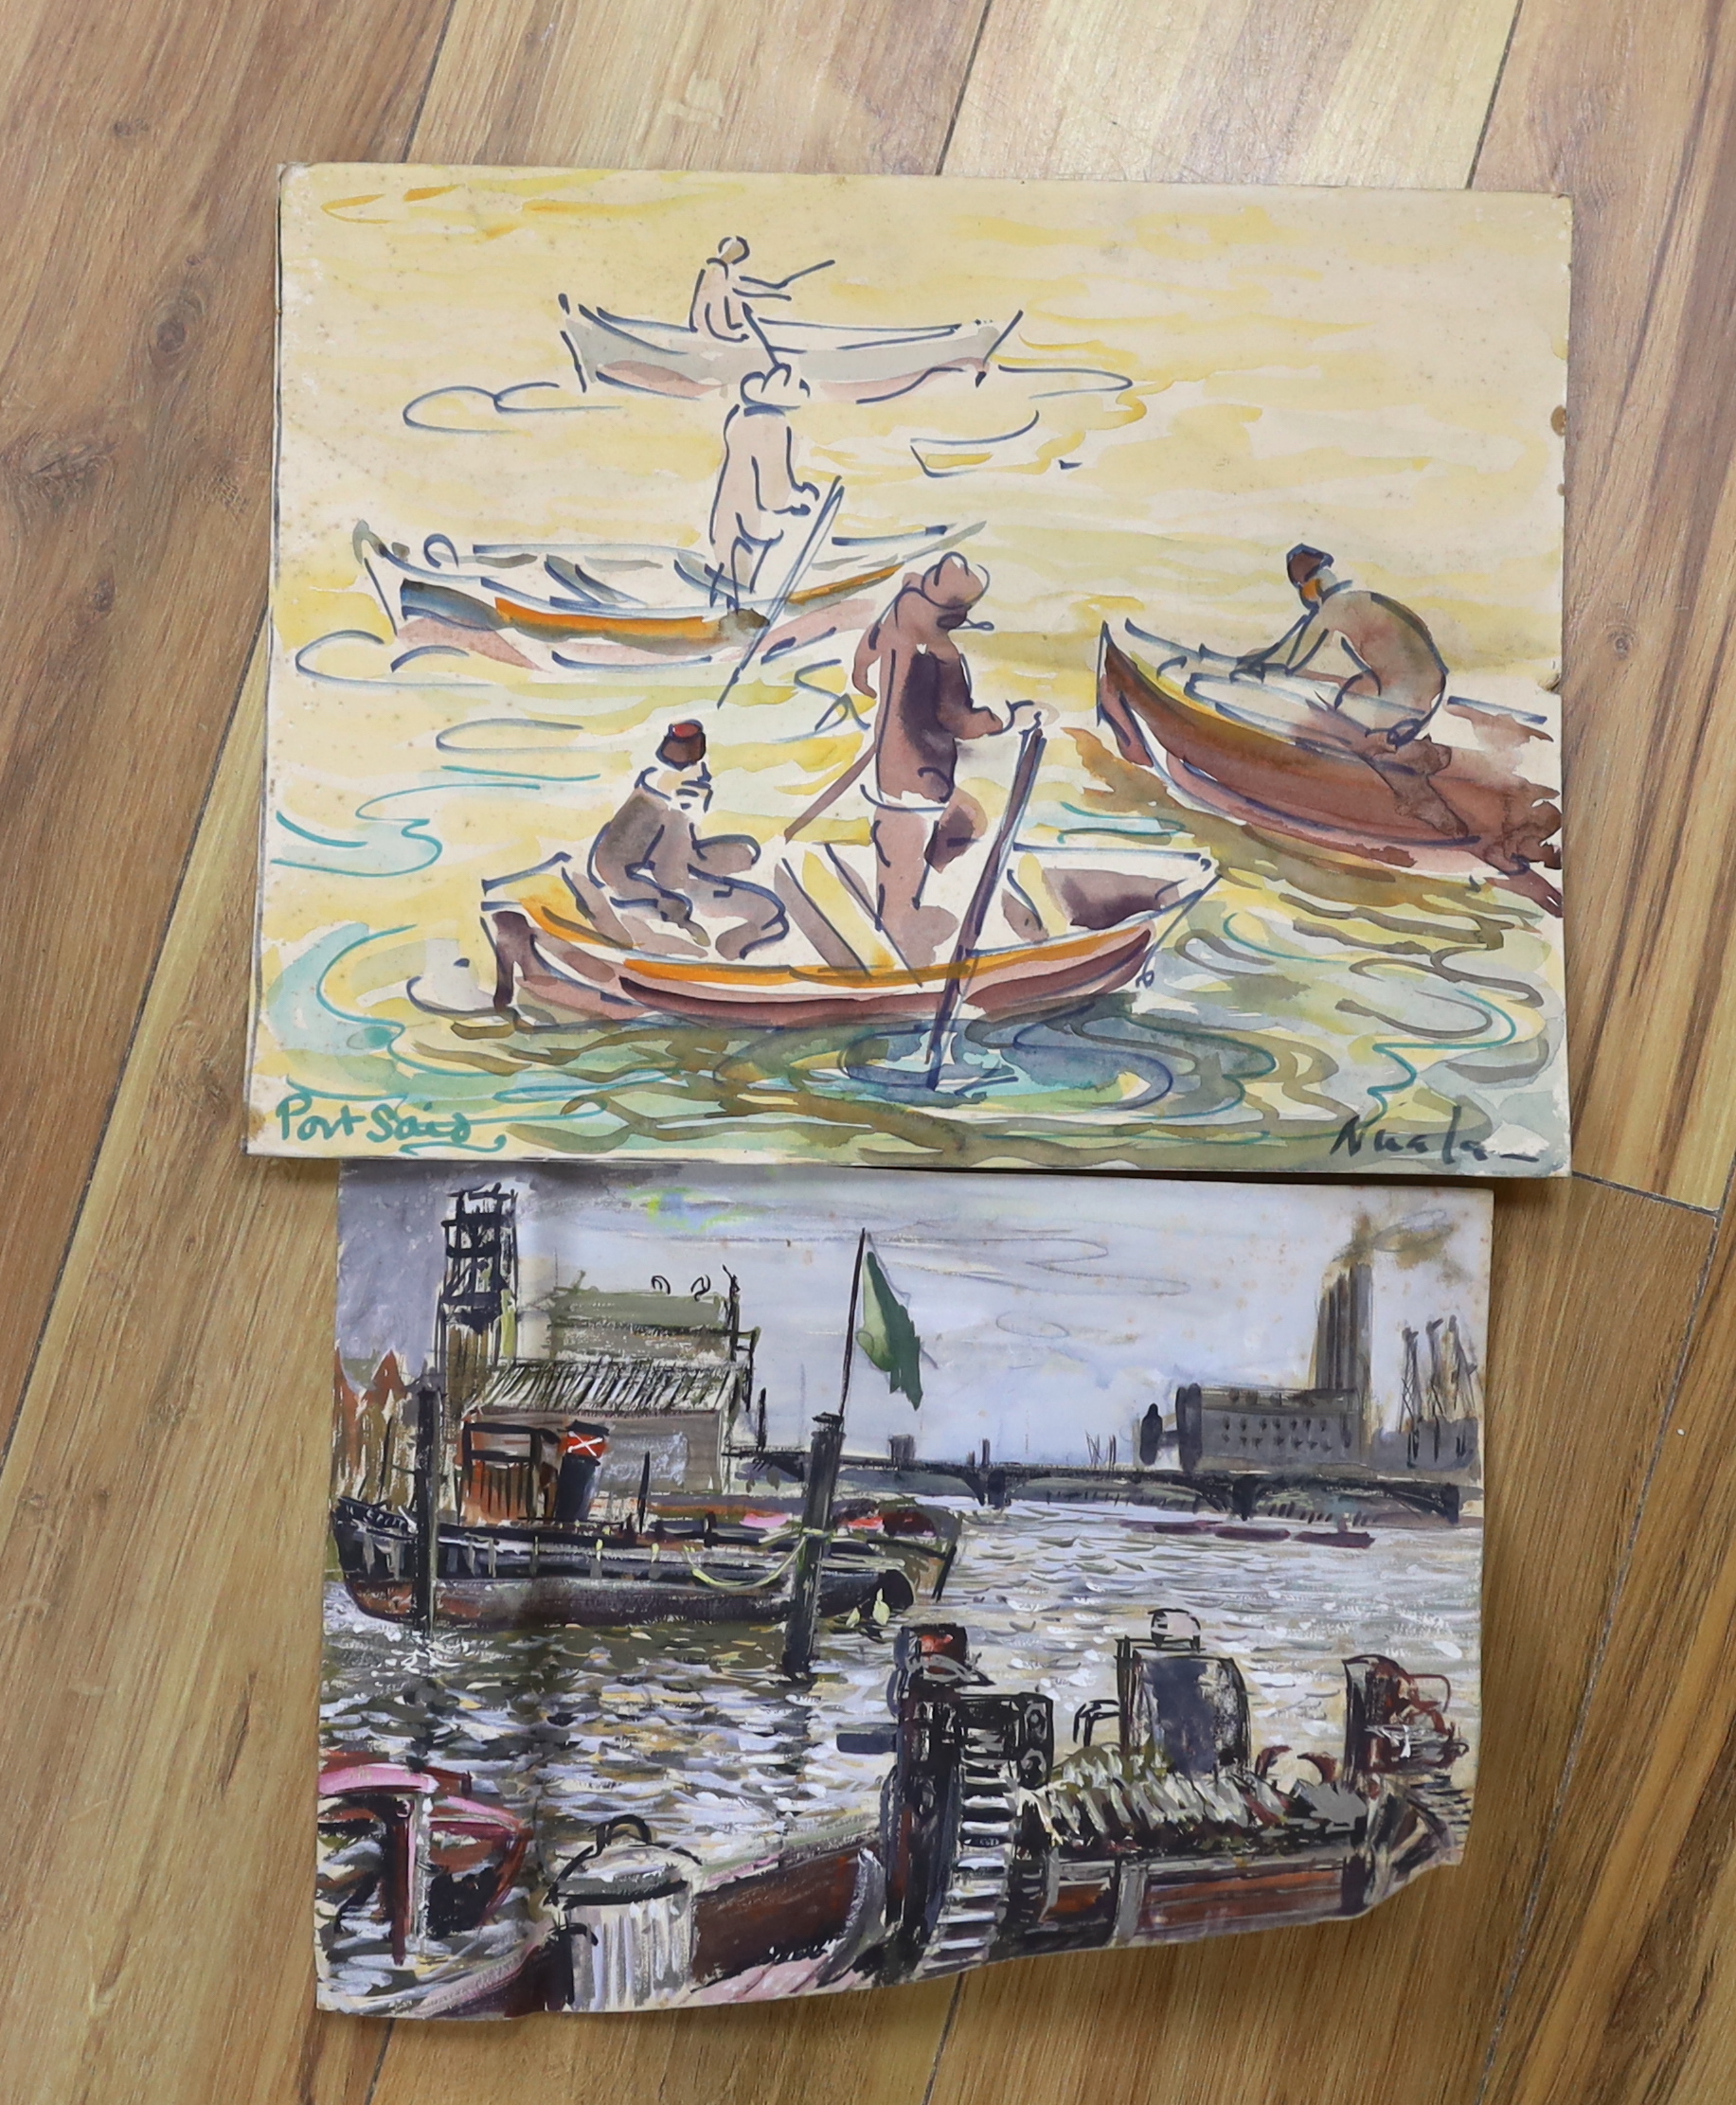 Nuala, ink and watercolour, 'Port Said', signed, 30 x 40cm, and a watercolour, English harbour scene, by another hand, 25 x 35cm